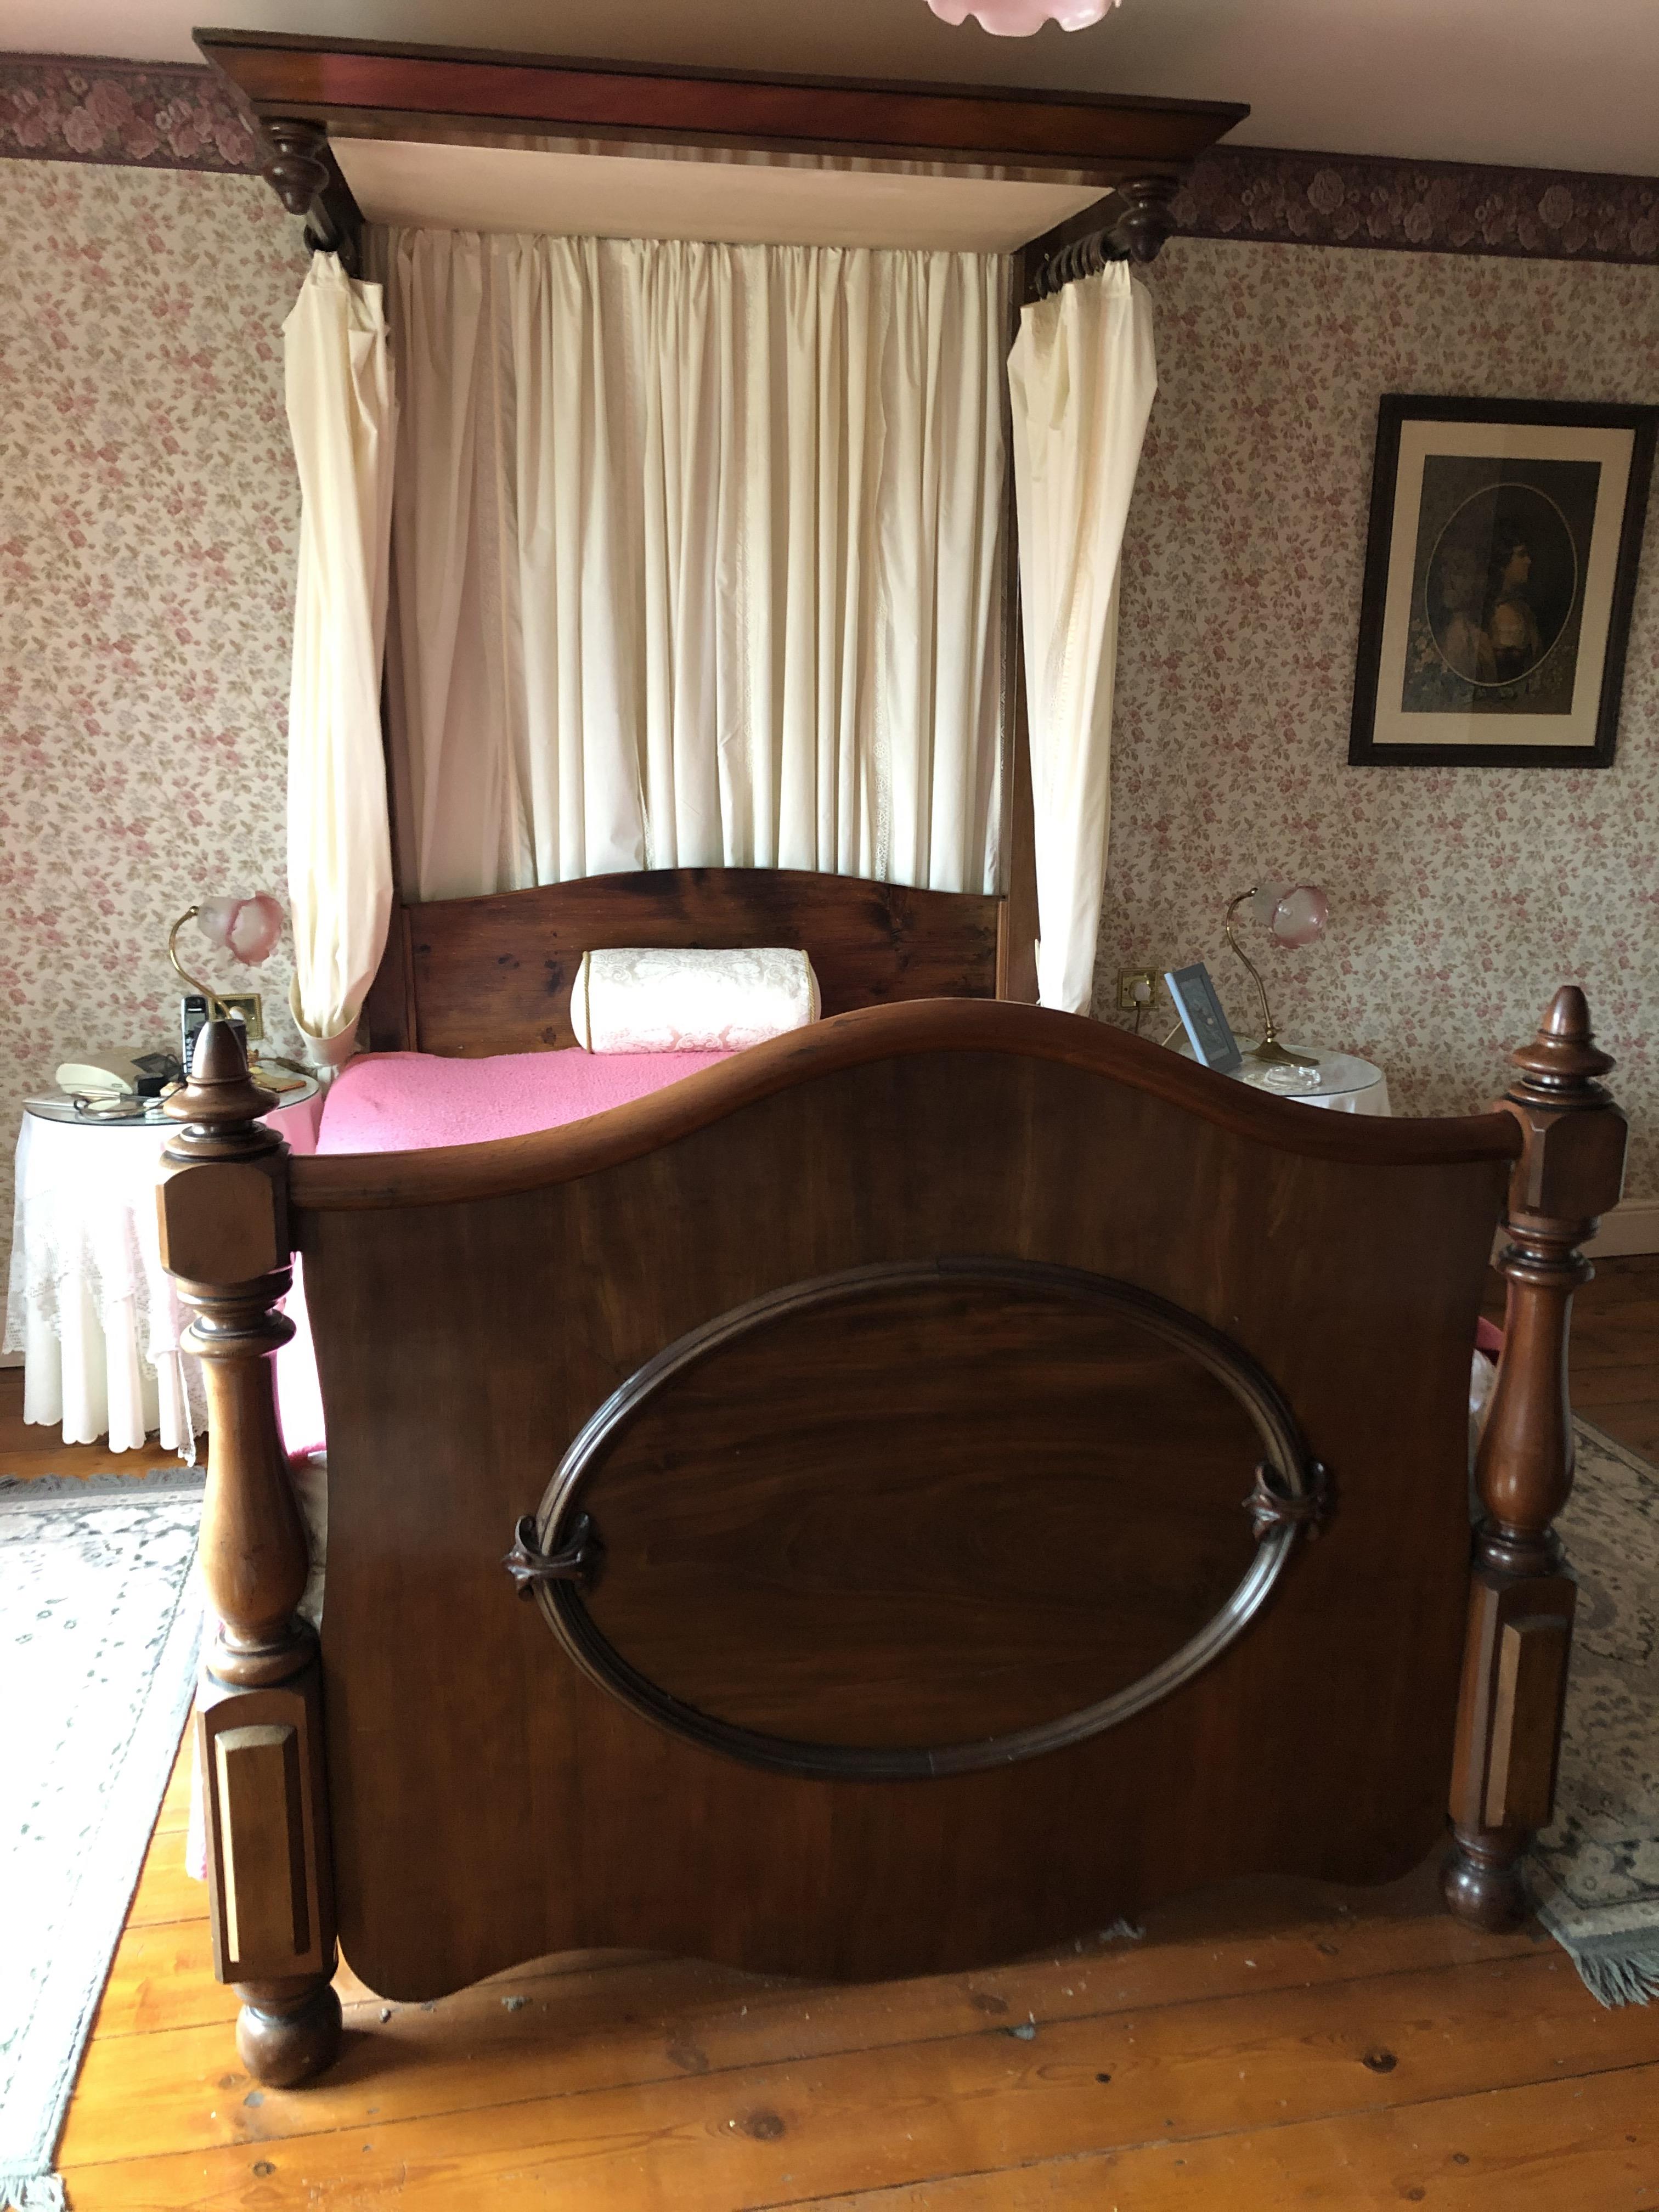 VICTORIAN FLAME MAHOGANY HALF TESTER BEDSTEAD AND MATTRESS - Image 2 of 5